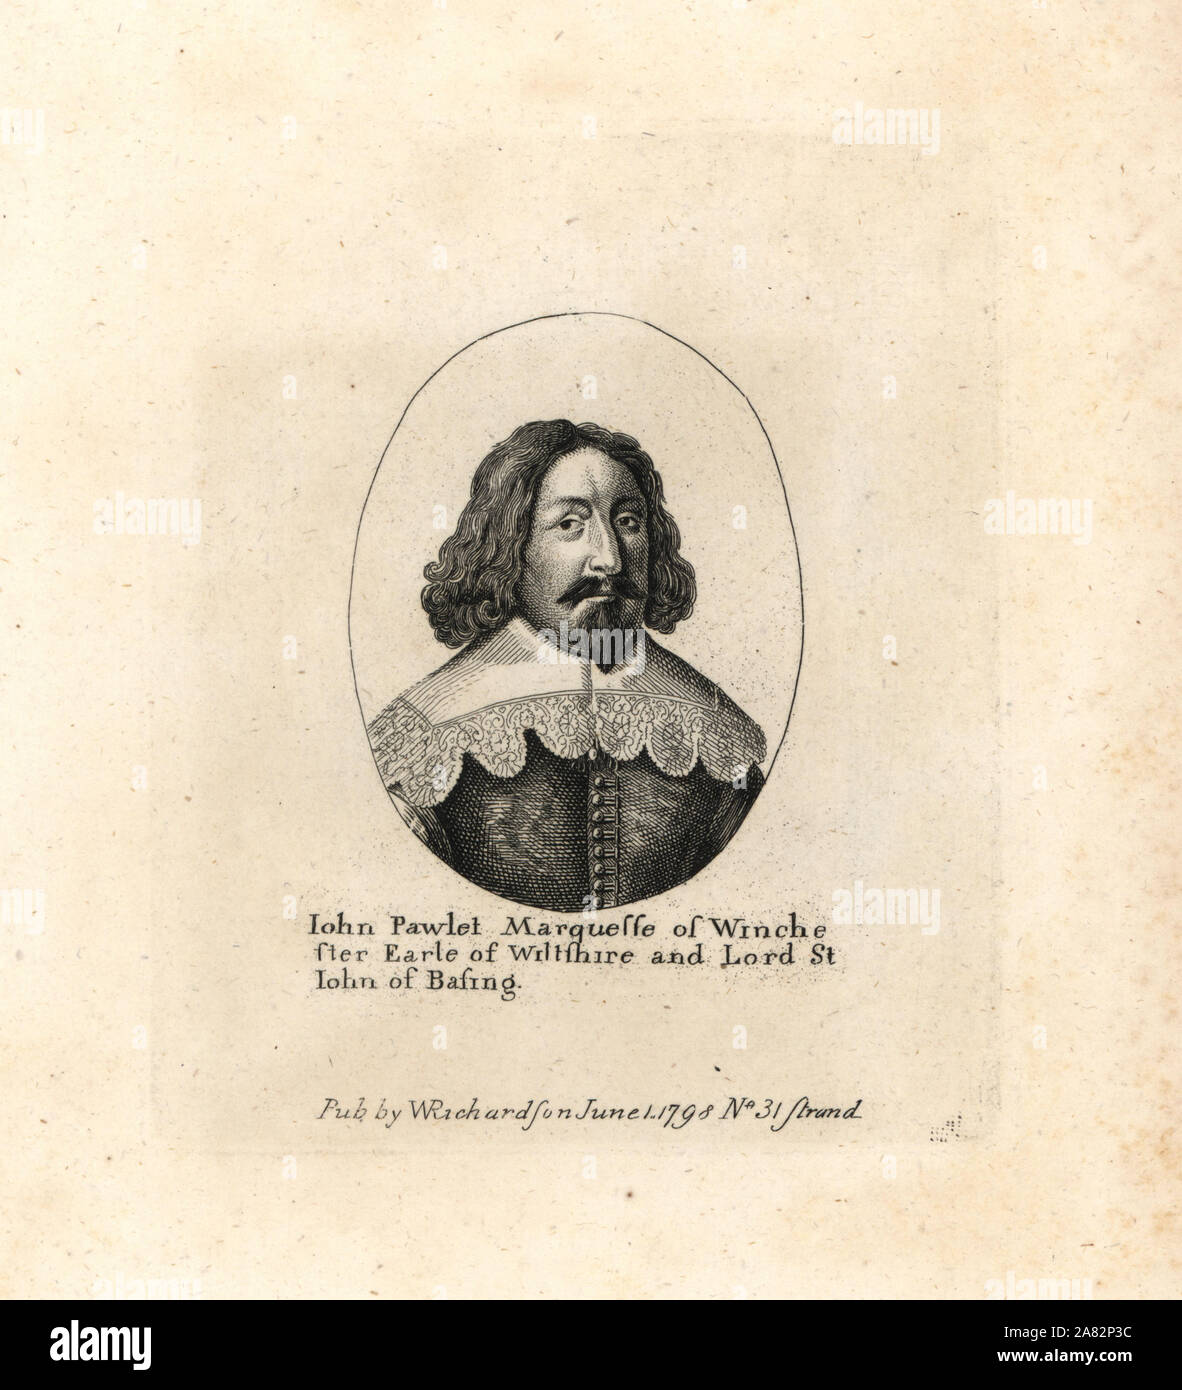 John Pawlet, 5th Marquess of Winchester, Earl of Wiltshire, died 1675. Copperplate engraving by Wenceslaus Hollar from William Richardson's Portraits Illustrating Granger's Biographical History of England, London, 1792–1812. James Granger (1723–1776) was an English clergyman, biographer, and print collector. Stock Photo